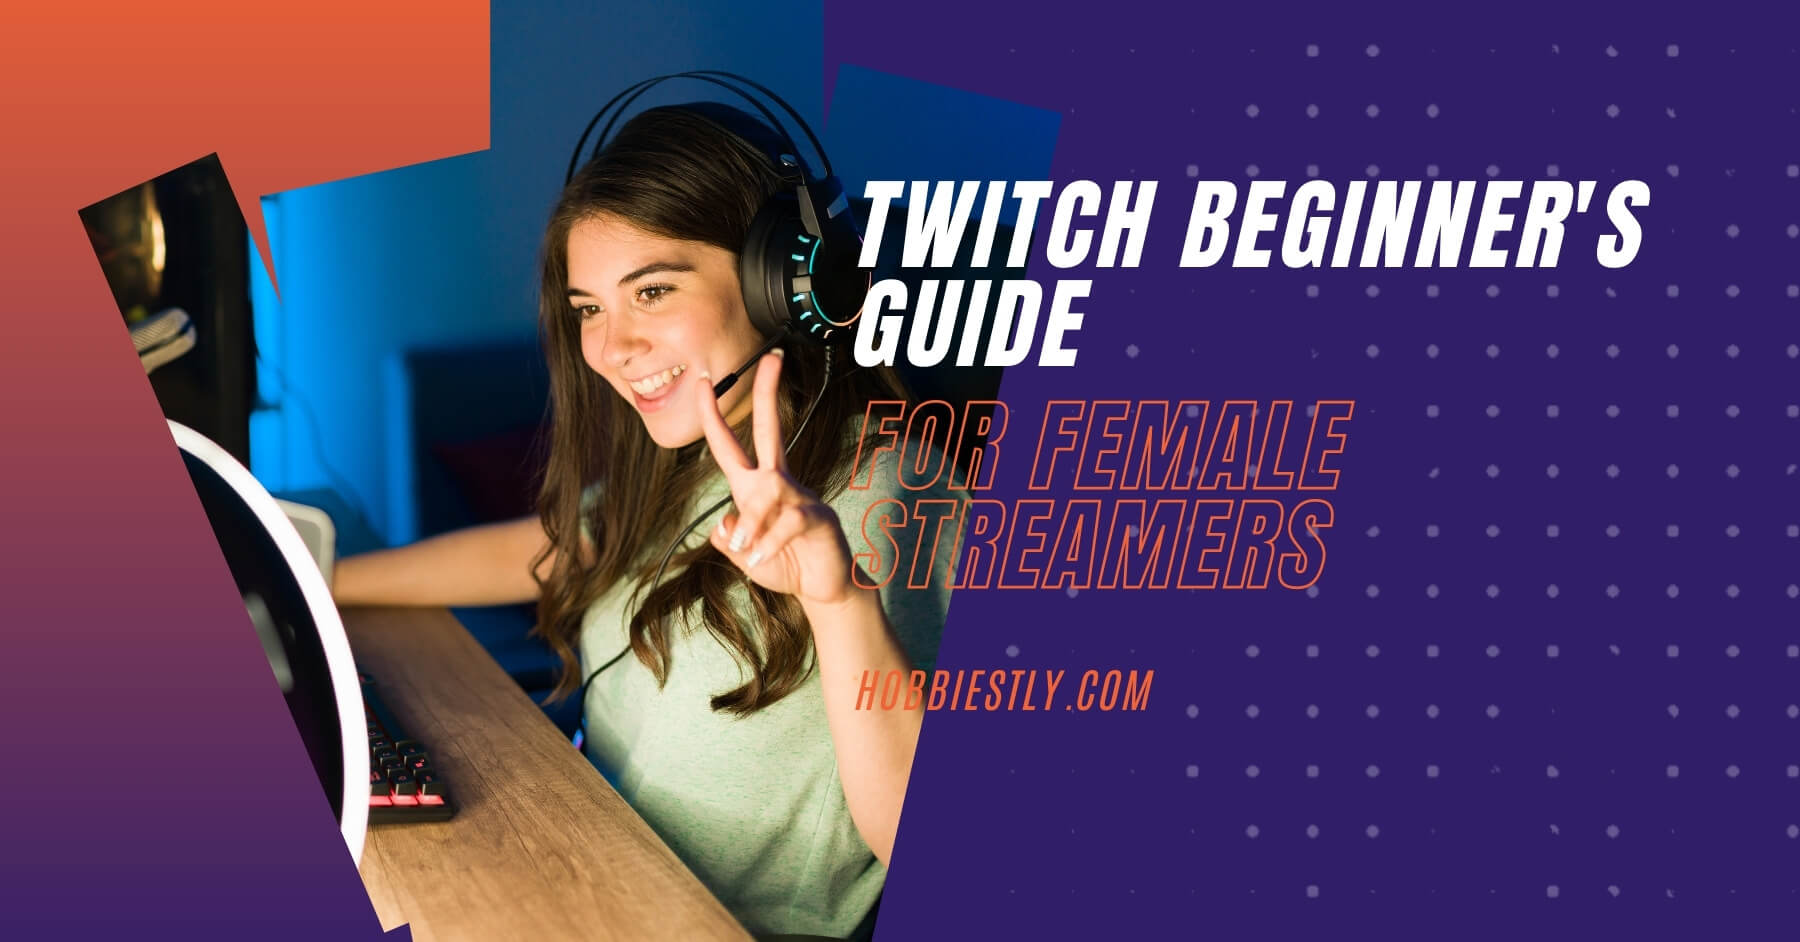 How to Become a Girl Twitch Streamer